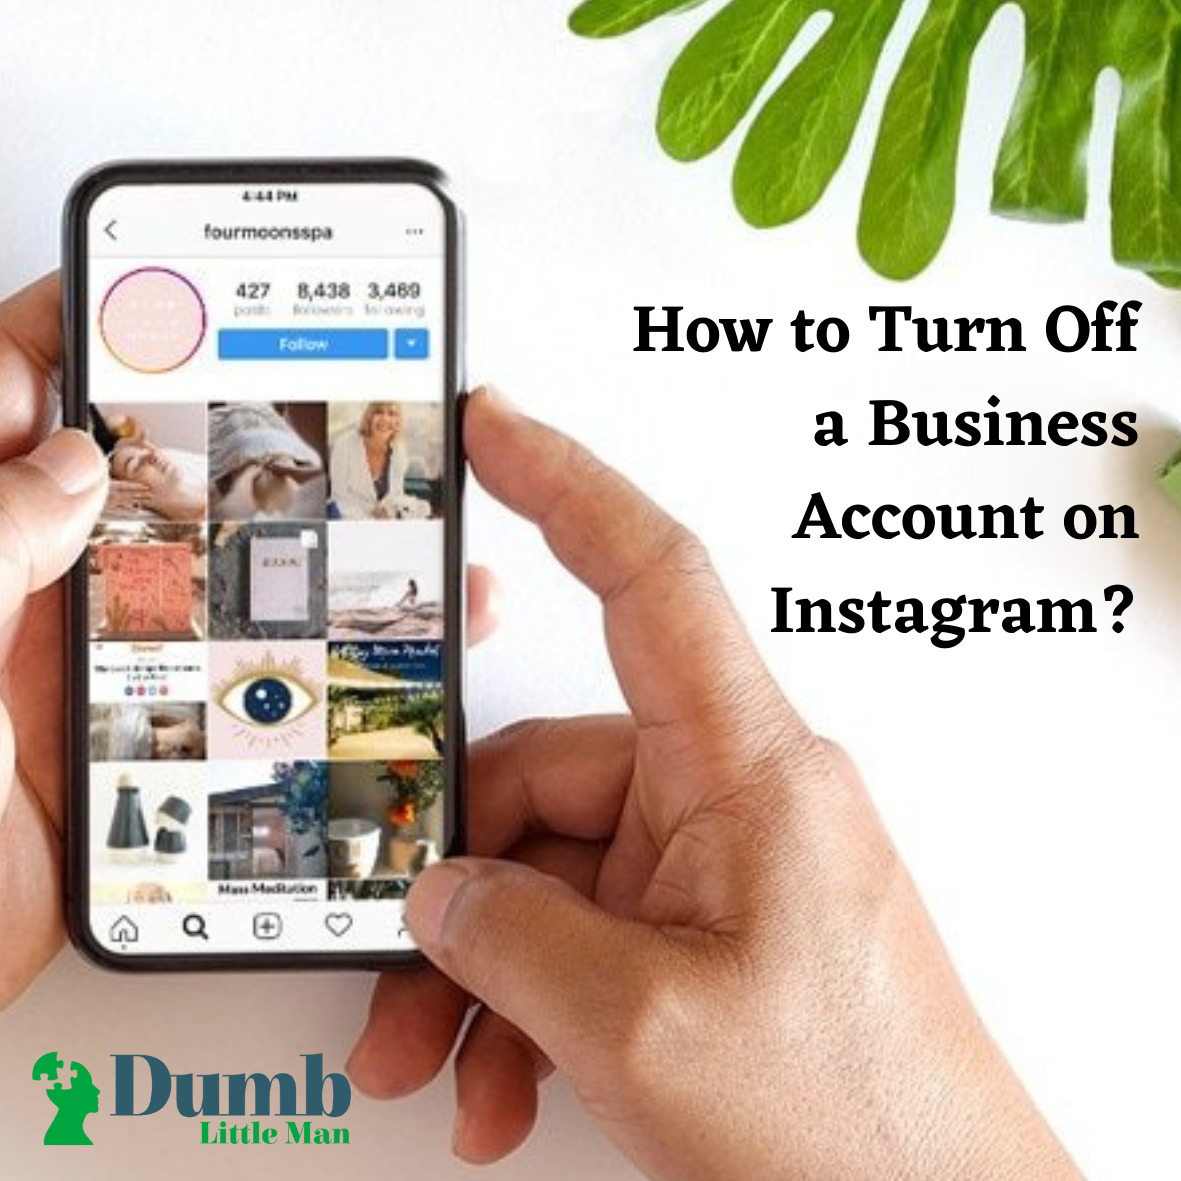 How to Turn Off a Business Account on Instagram? - Smile and Happy